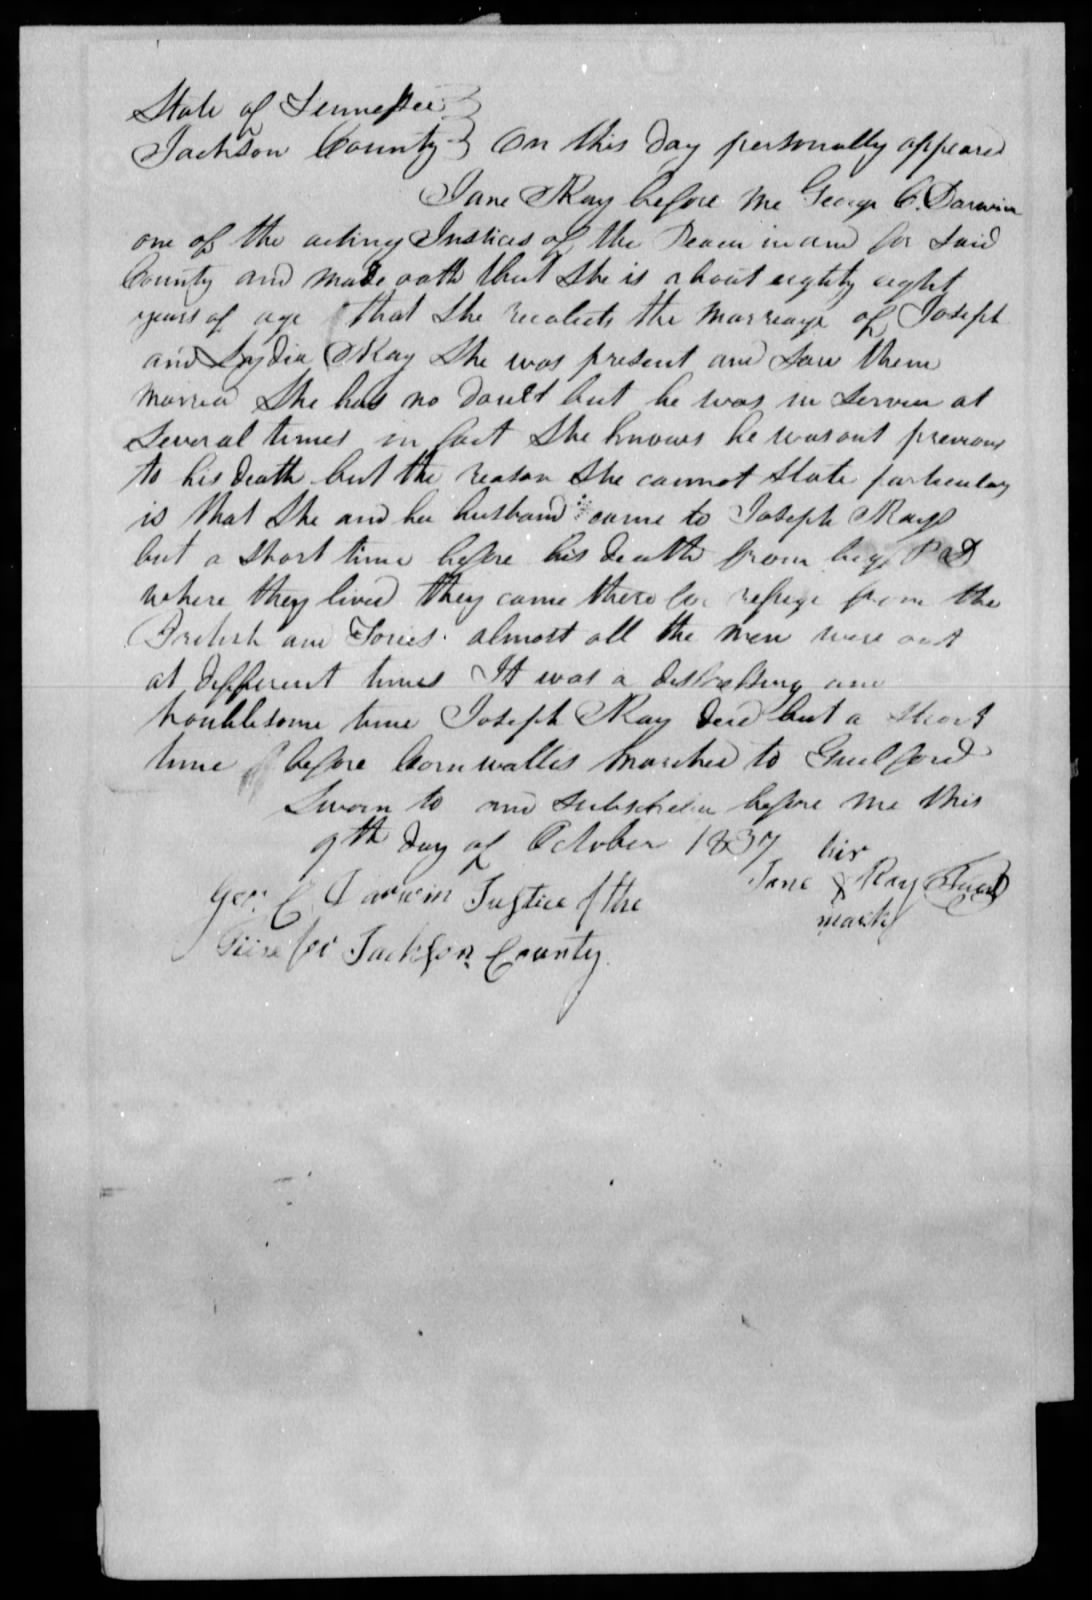 Affidavit of Jane Ray in support of a Pension Claim for Lydia Ray, 9 October 1837